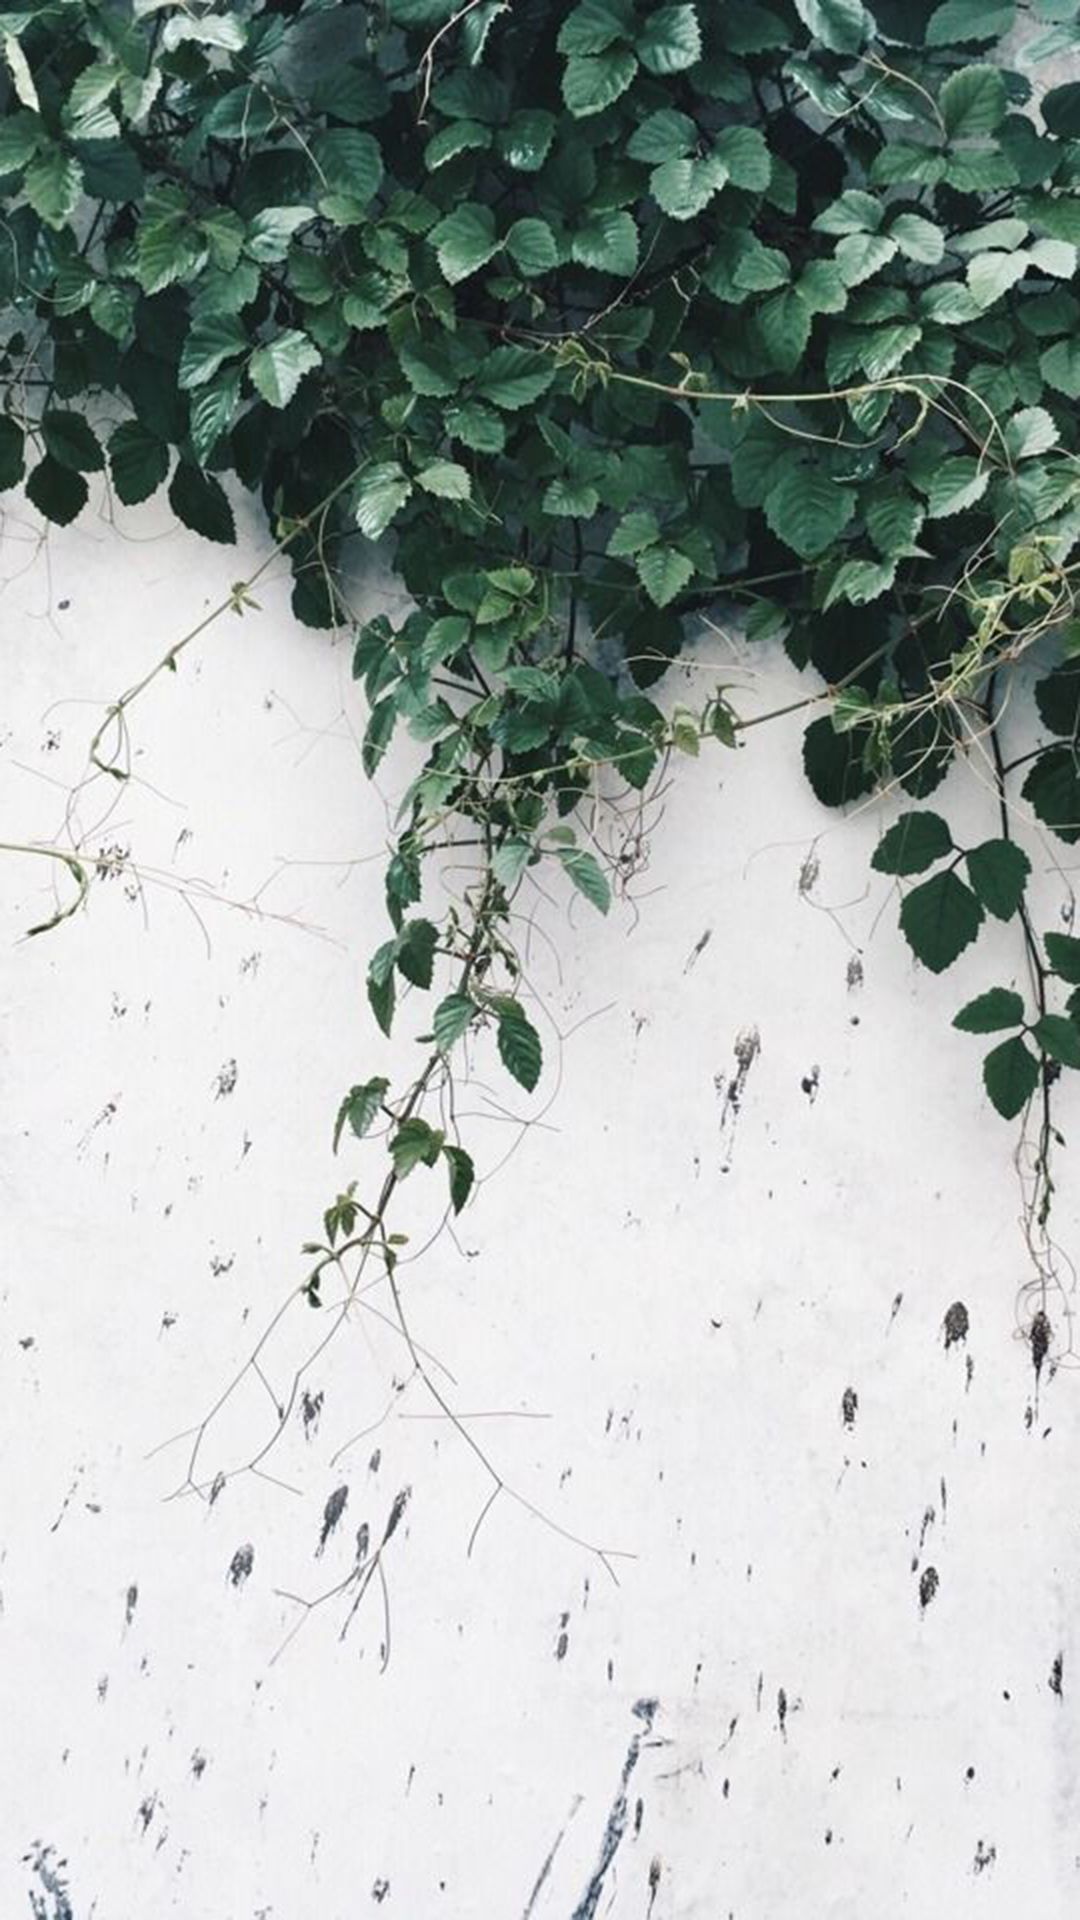 A plant with green leaves climbing up a white wall - Plants